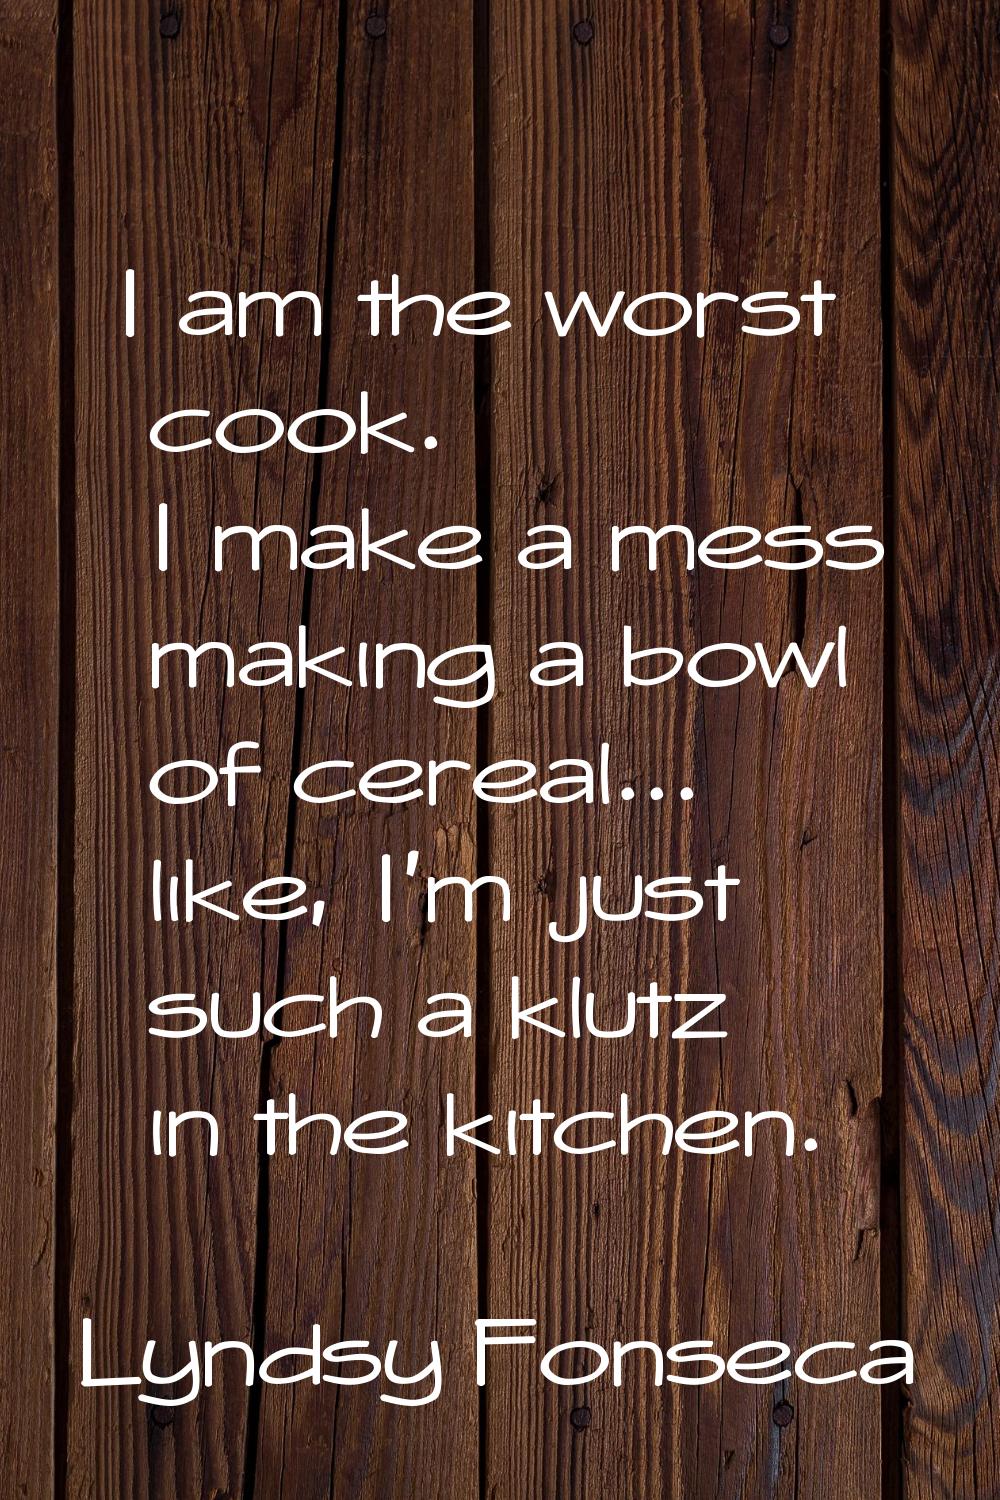 I am the worst cook. I make a mess making a bowl of cereal... like, I'm just such a klutz in the ki